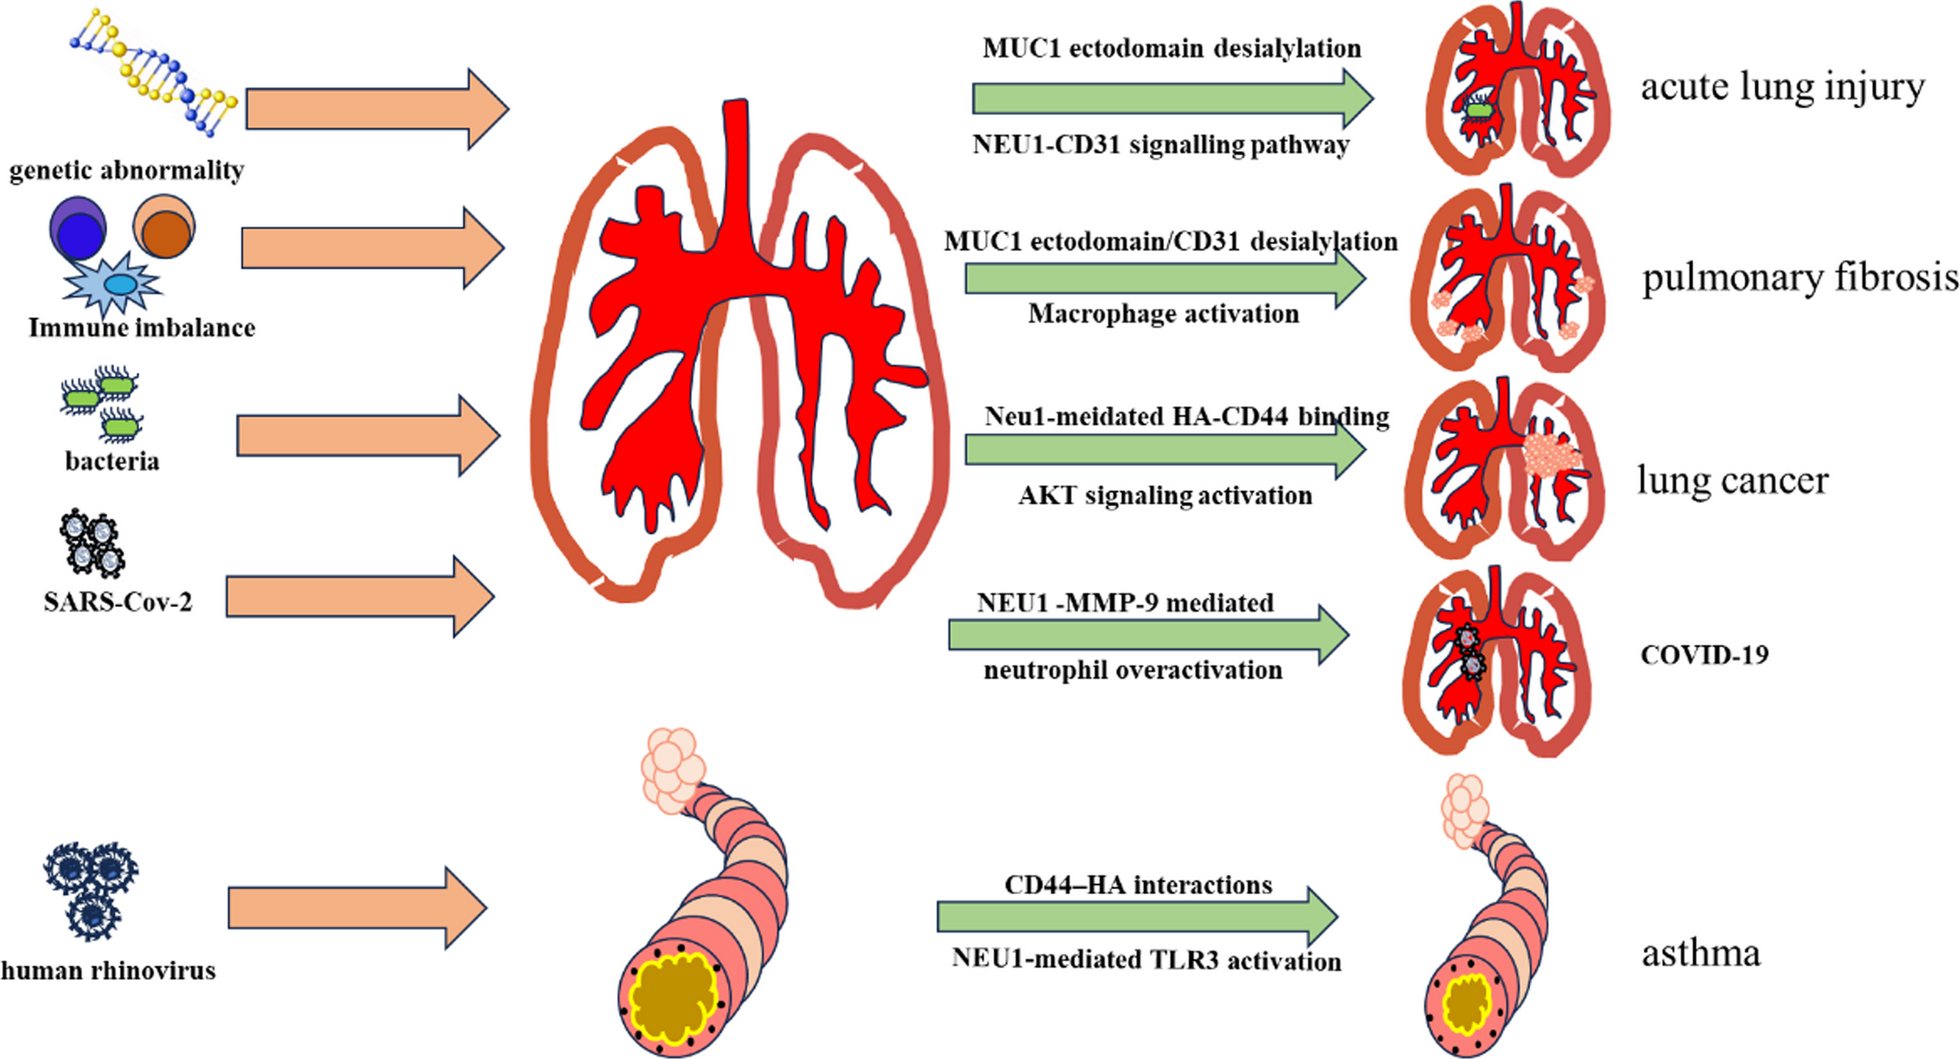 The role of sialidase Neu1 in respiratory diseases